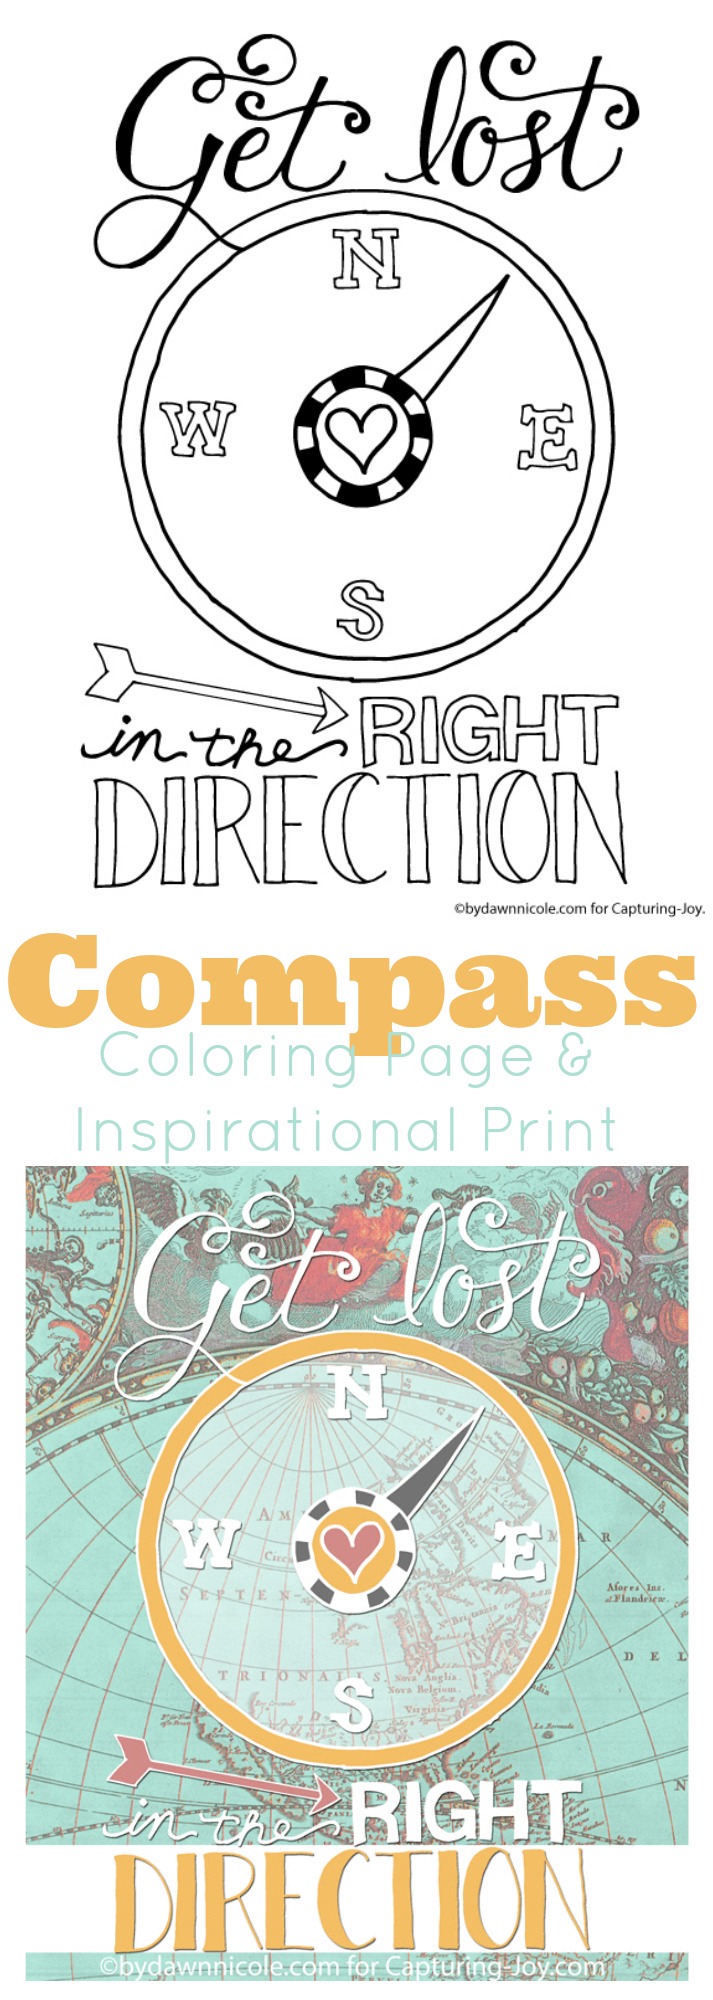 Compass coloring page and inspirational print the kids will love to color.